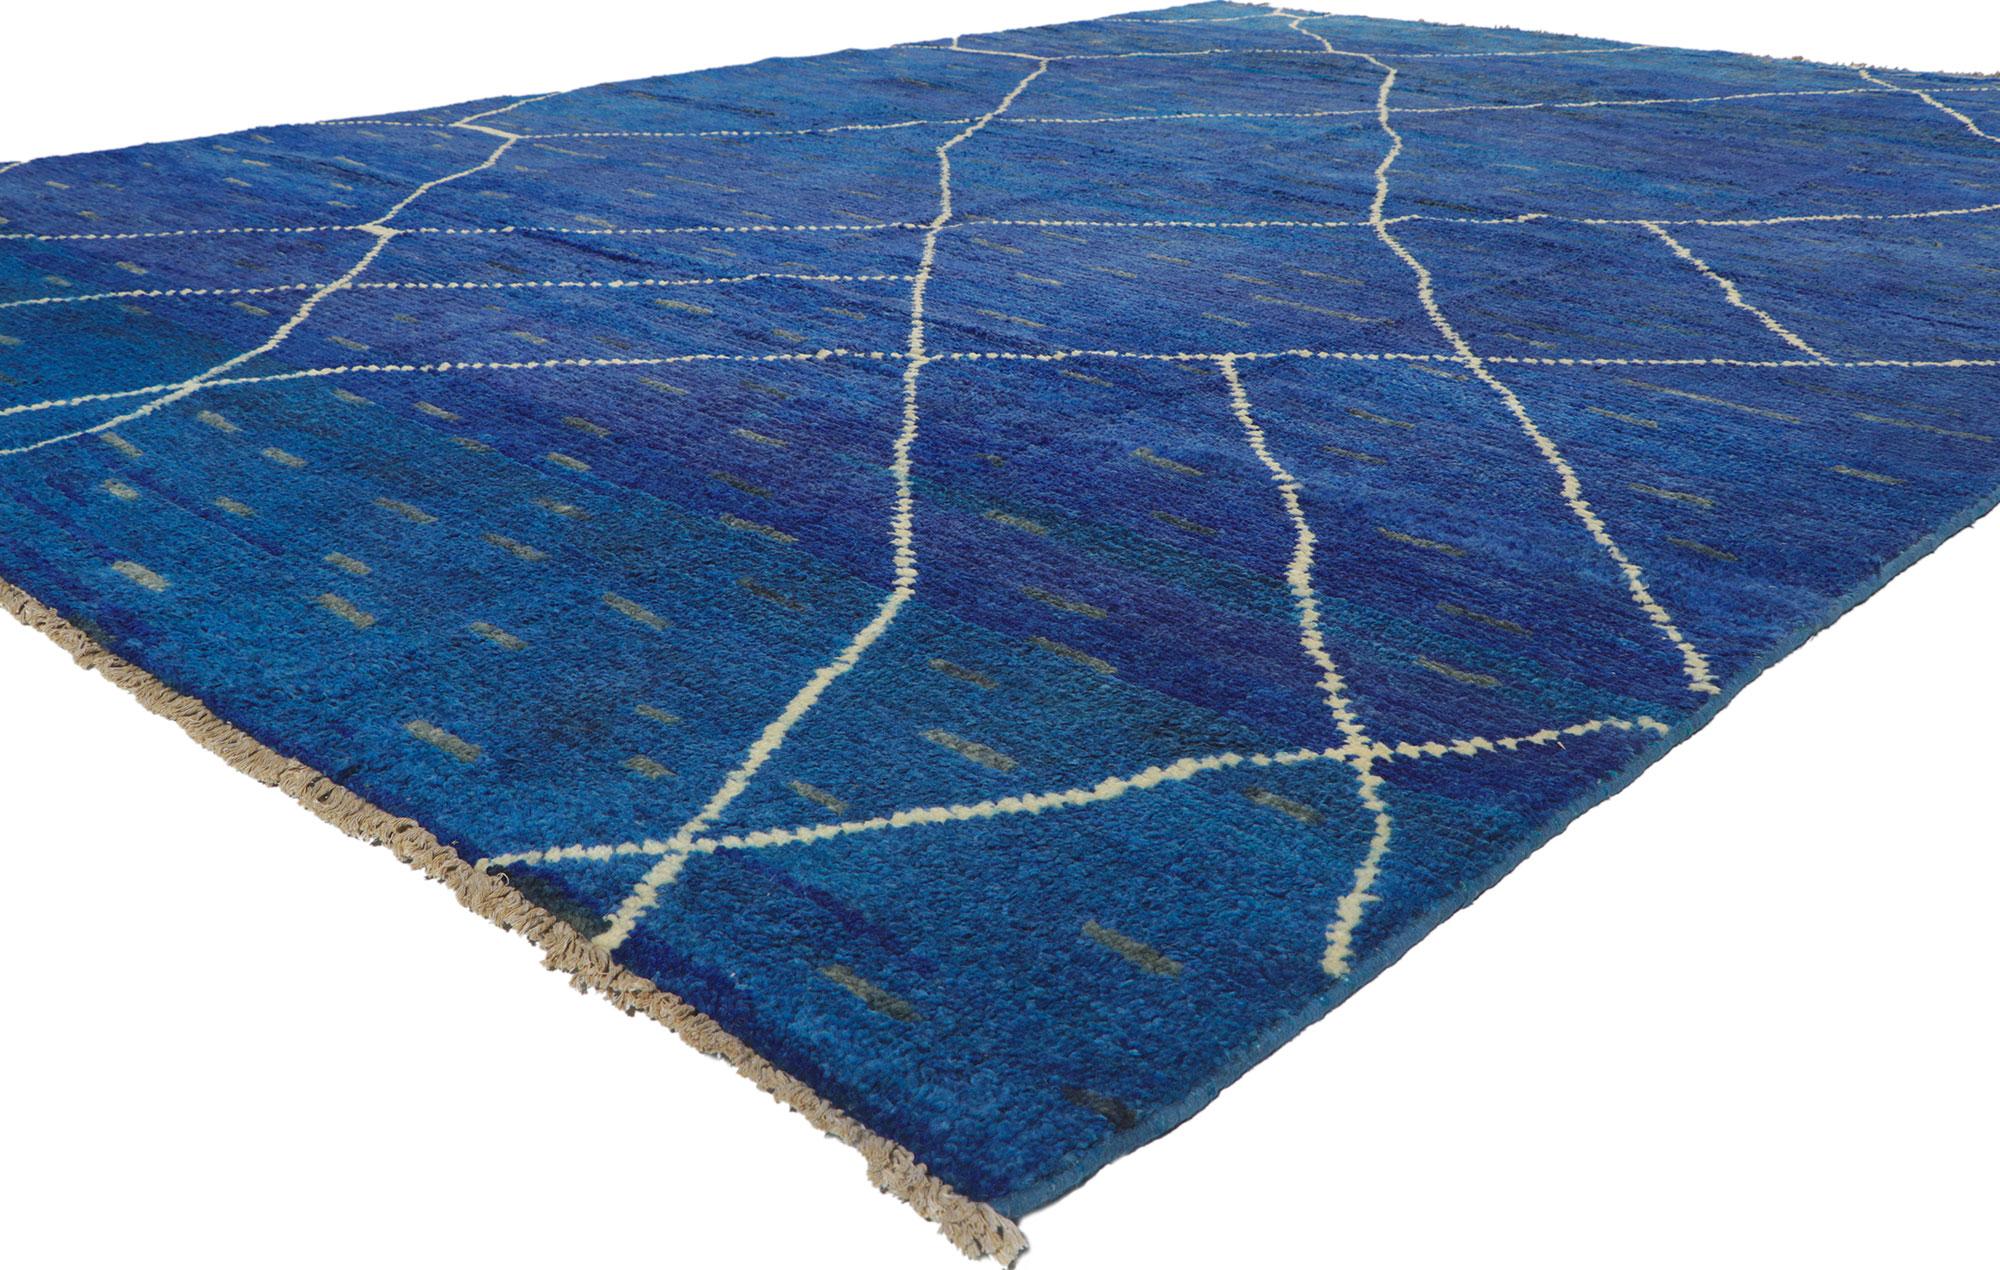 80703 New Contemporary blue Moroccan Trellis rug 09'05 x 12'11. With its simplicity, plush pile and Mid-Century Modern vibes, this hand knotted wool contemporary Moroccan style rug is a captivating vision of woven beauty. The abrashed blue field